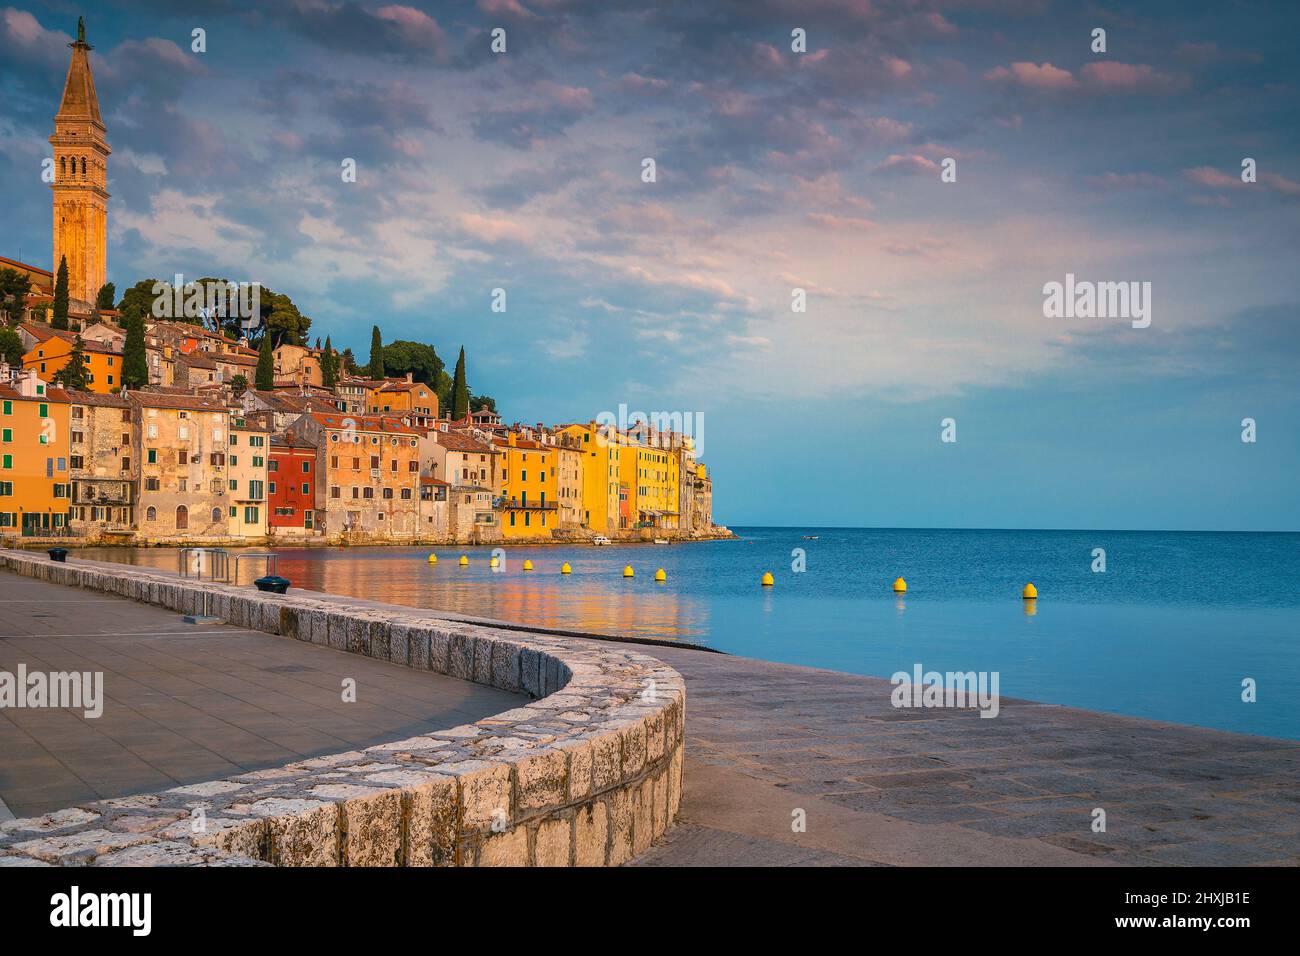 Picturesque walkway and waterfront with colorful old buildings in Rovinj at sunrise, Istria, Croatia, Europe Stock Photo